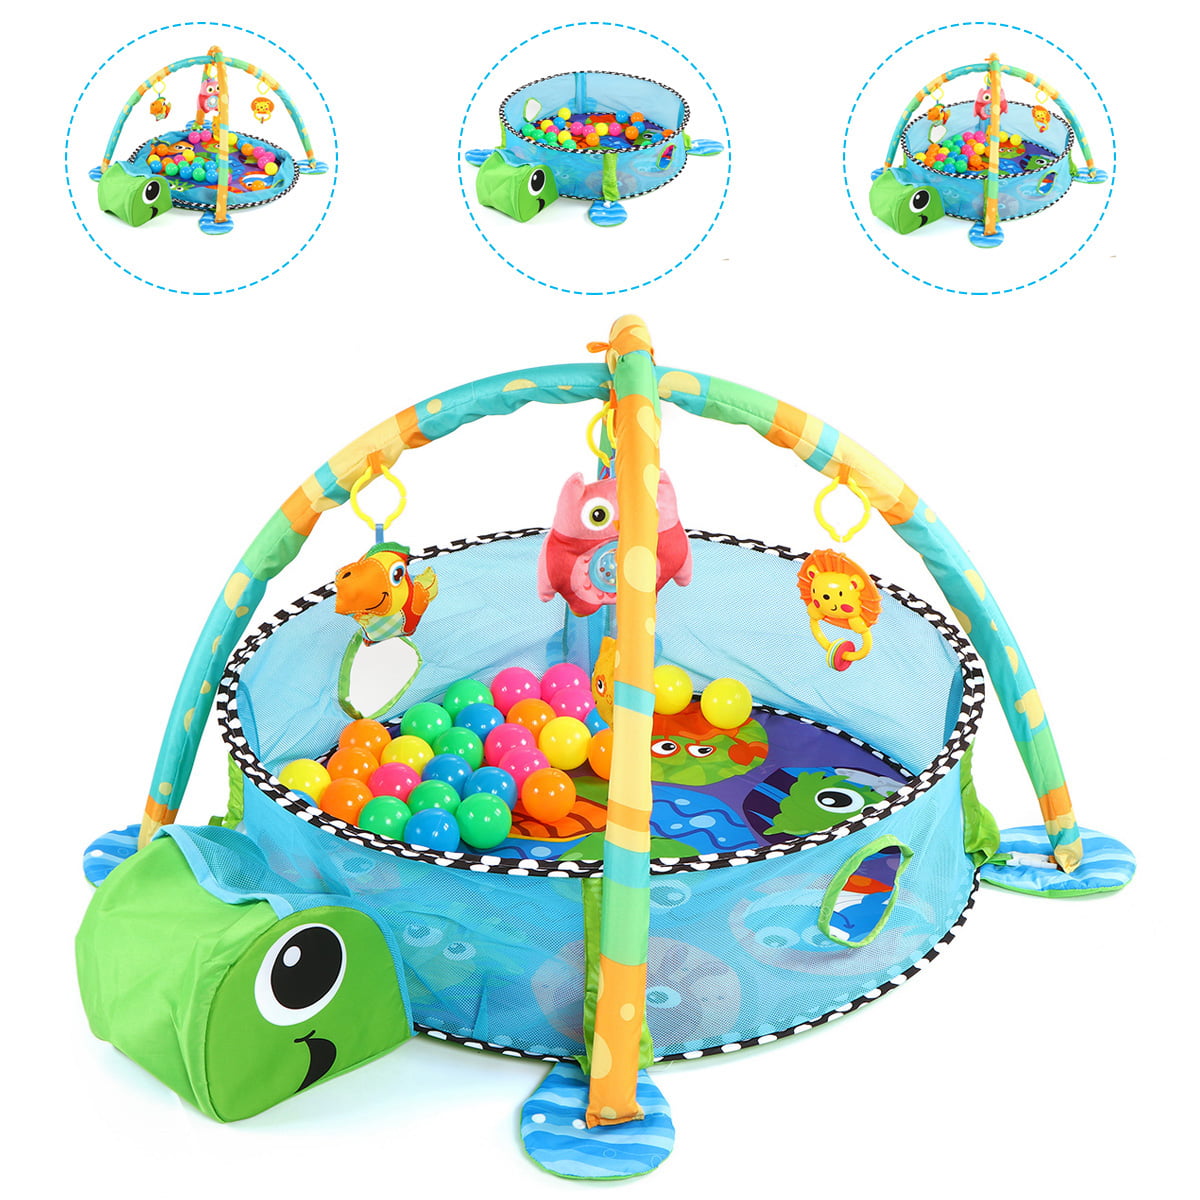 Baby Playing Mat Newborn Infant Baby Activity Gym Game Play Crawling Mat Toys Ball Pit Kids Activity Carpet Infant Gift W Hanging Toys Ocean Ball Toys Gift For Kids Walmart Com